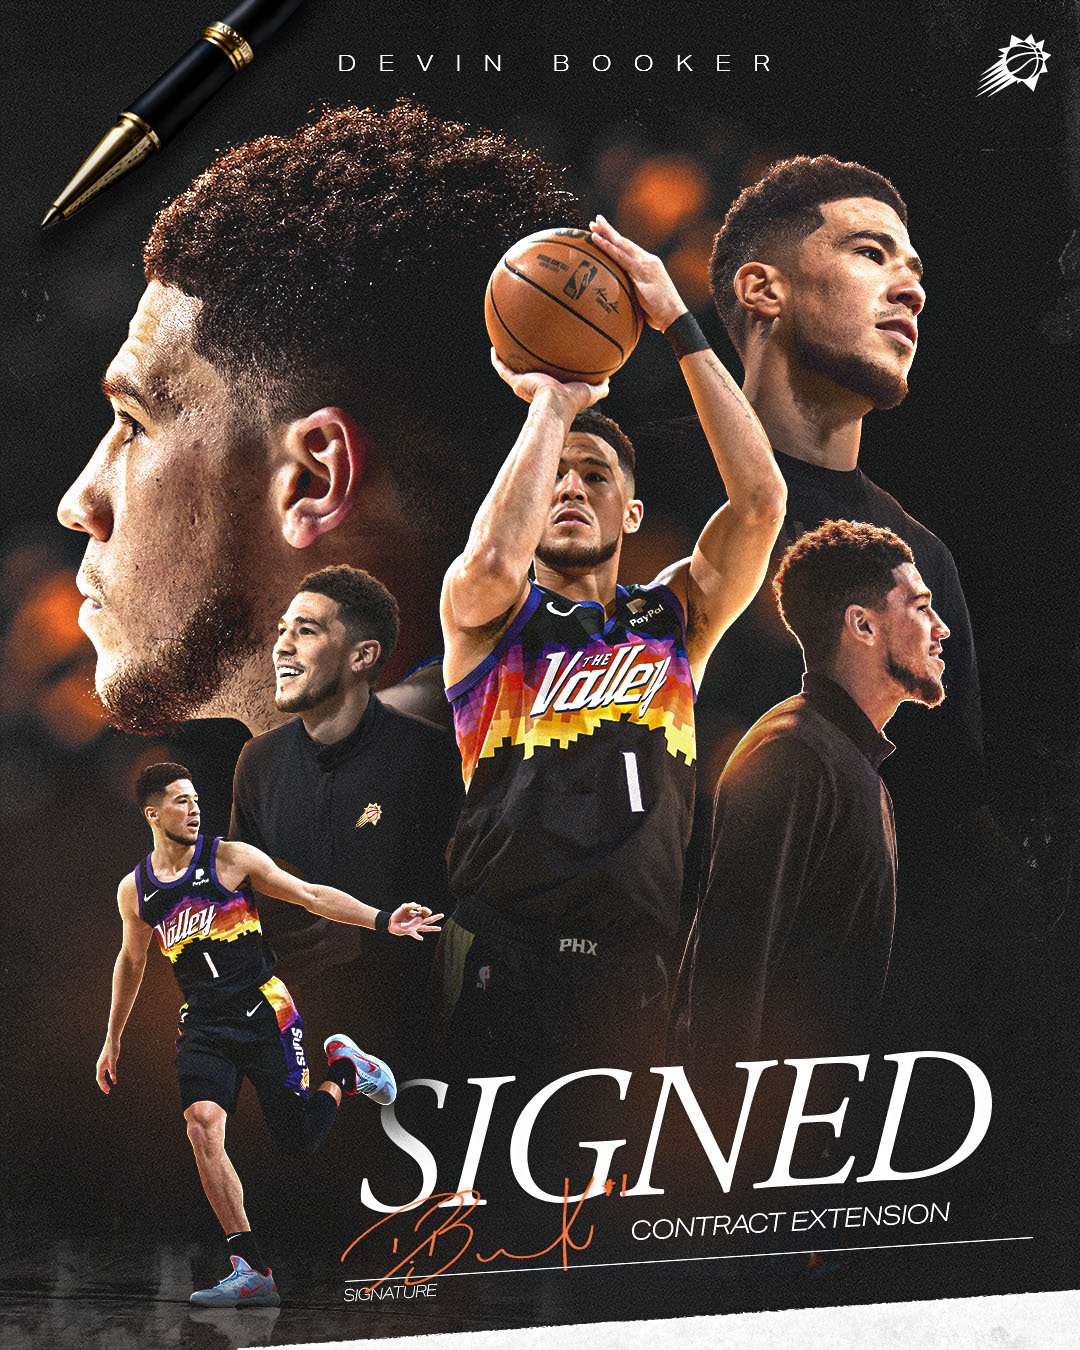 Devin Booker of the Phoenix Suns signed